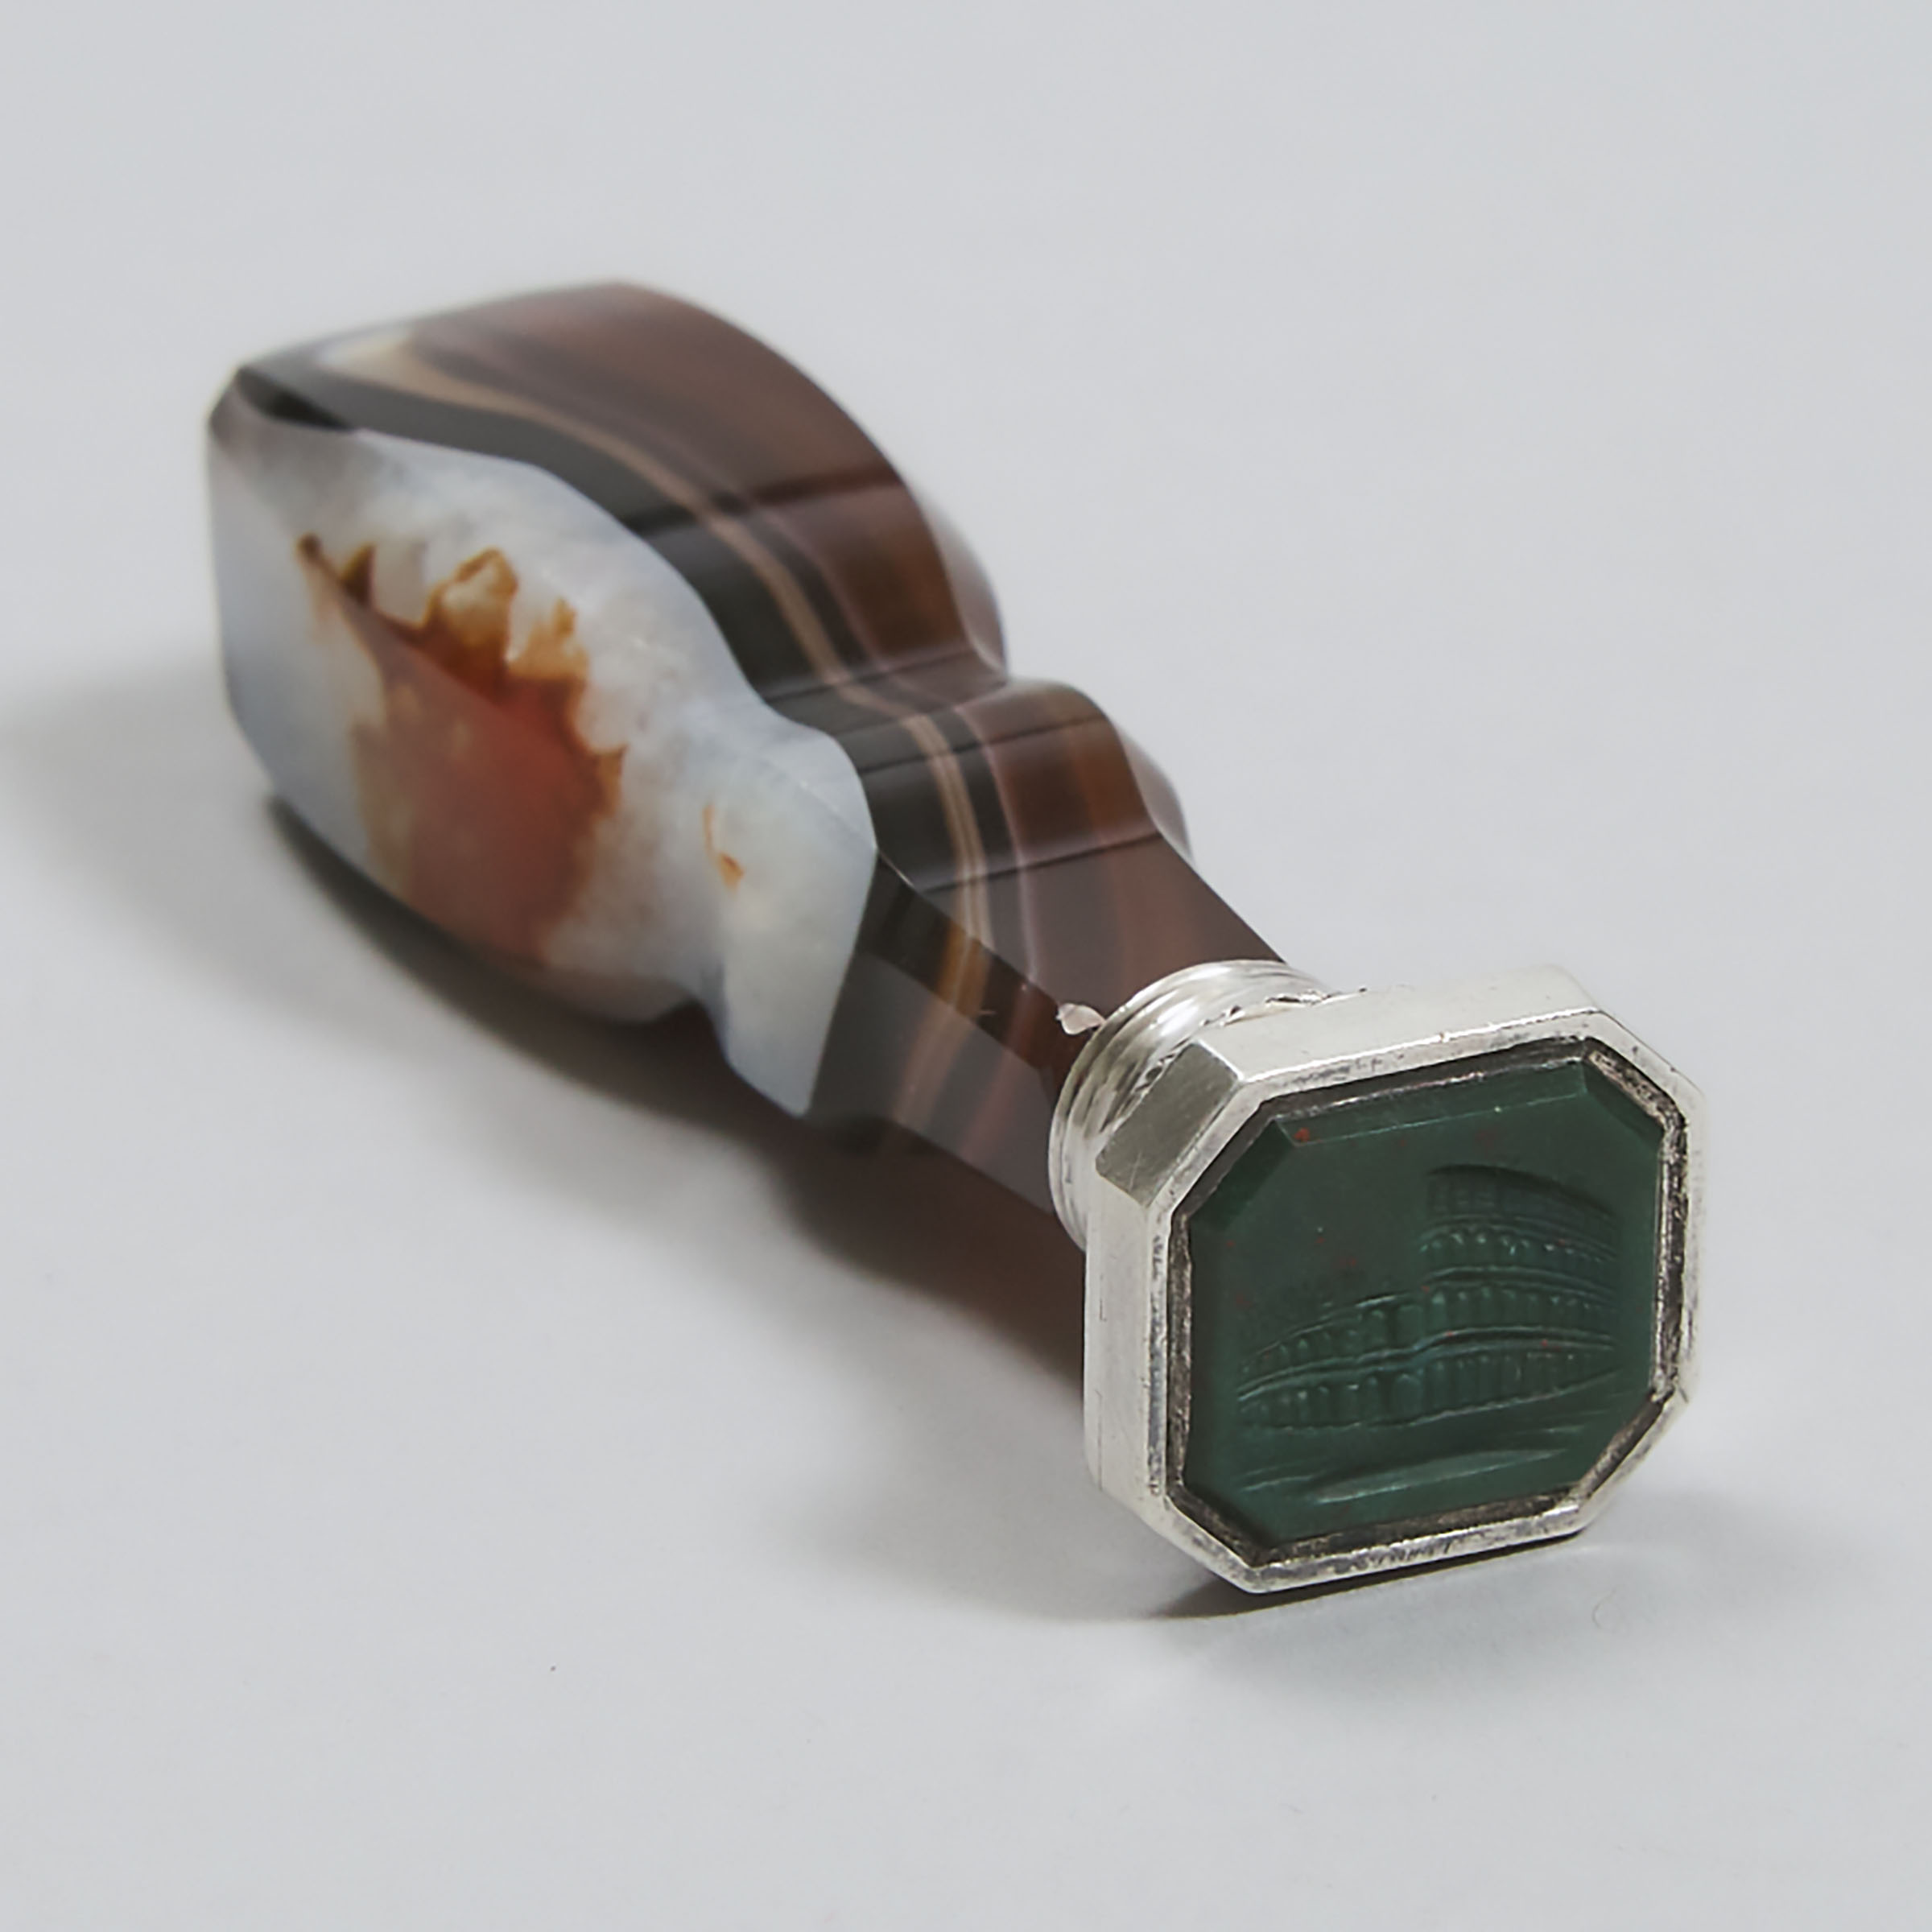 Italian Silver Mounted Agate and Bloodstone Colosseum Desk Seal, Rome, 19th early 20th century